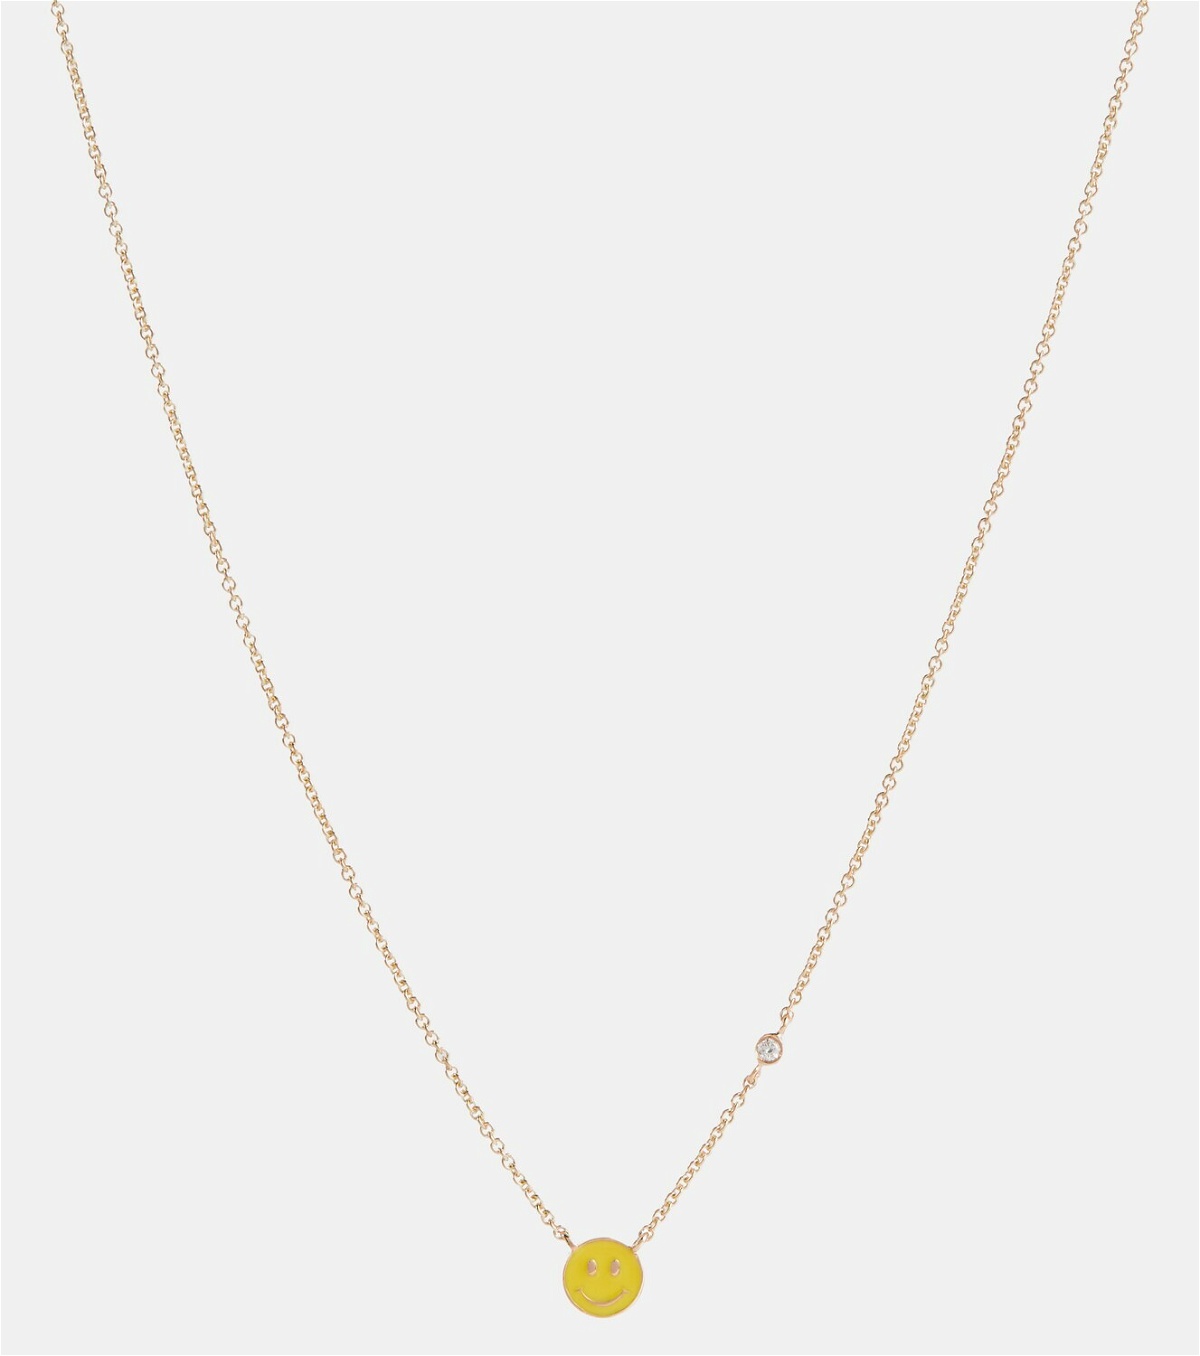 Sydney Evan Happy Face 14kt gold necklace with diamond